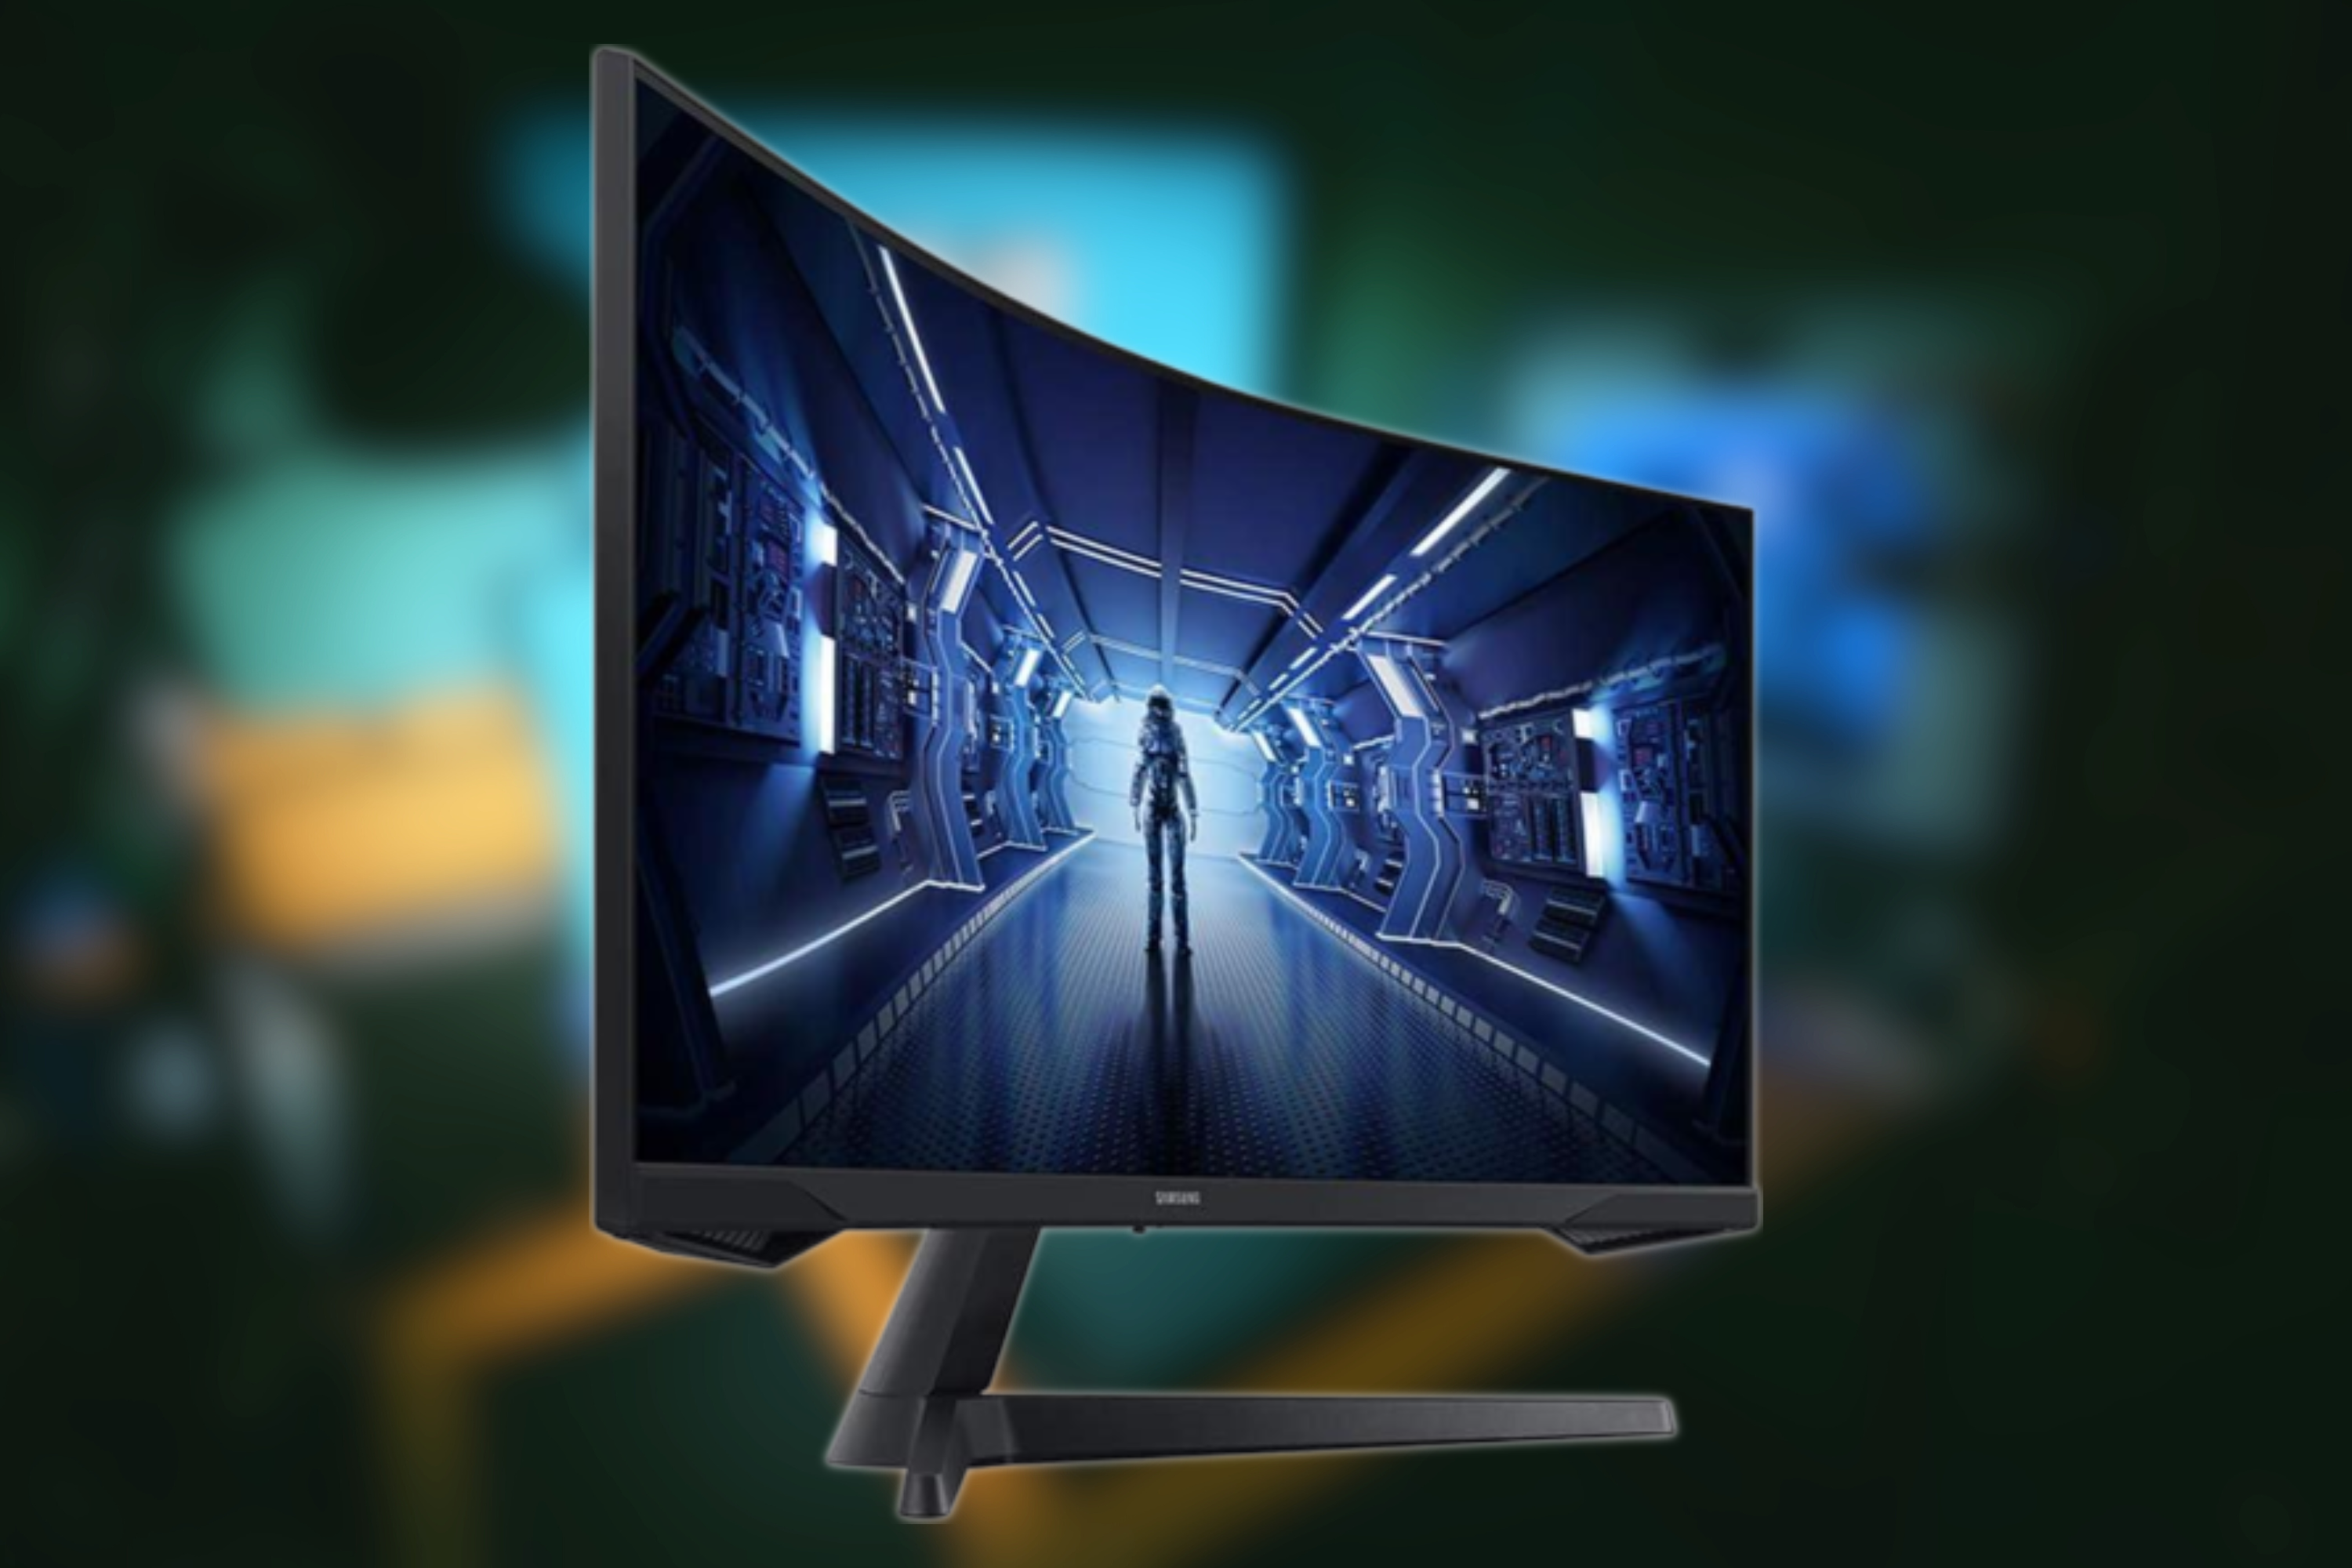 SAMSUNG 34-Inch Odyssey G5 Ultra-Wide Gaming Monitor on blurred background with space image on screen